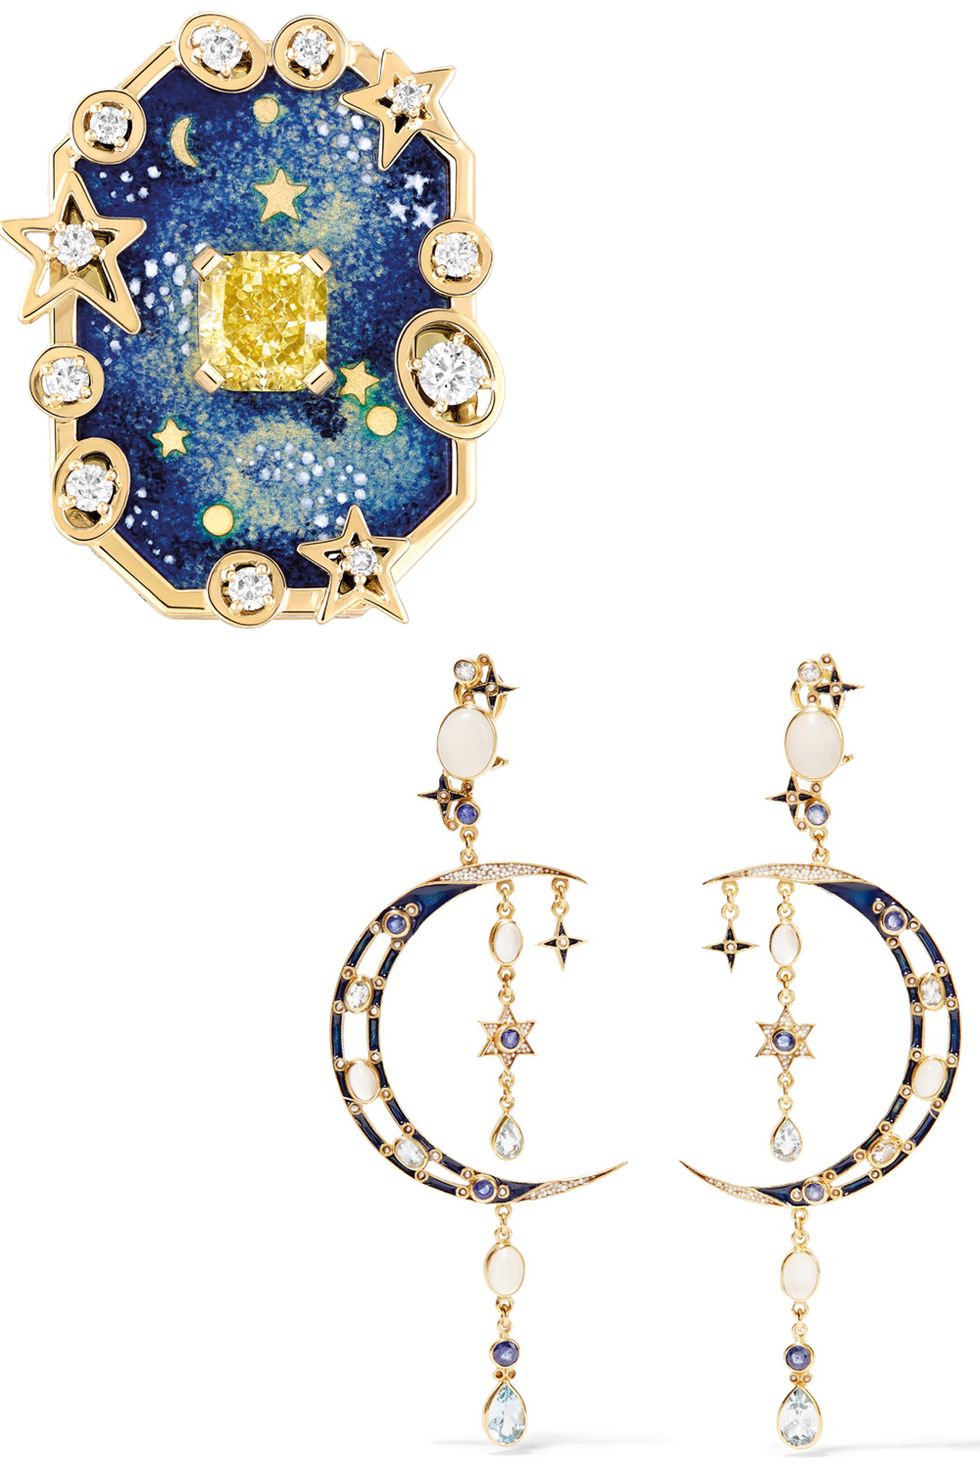 <p>Celestial-inspired jewelry feels as romantic as a floral motif, but with an element of whimsy–and a cheeky nod to your dreams of the perfect day.</p><p><br></p><p><em><strong>CHANEL Fine Jewelry</strong> 'Vendôme Comète' ring in yellow gold and "grand feu" enamel set with a 1.5 carat cushion cut yellow diamond and brilliant cut diamonds, price upon request, </em><em><a href="http://www.chanel.com/en_US/" target="_blank">chanel.com</a>; <strong>Percossi Papi </strong>chandelier earrings, $1,400, <a href="https://www.net-a-porter.com/us/en/product/692181/Percossi_Papi/gold-plated-multi-stone-earrings" target="_blank">net-a-porter.com</a>.</em></p>